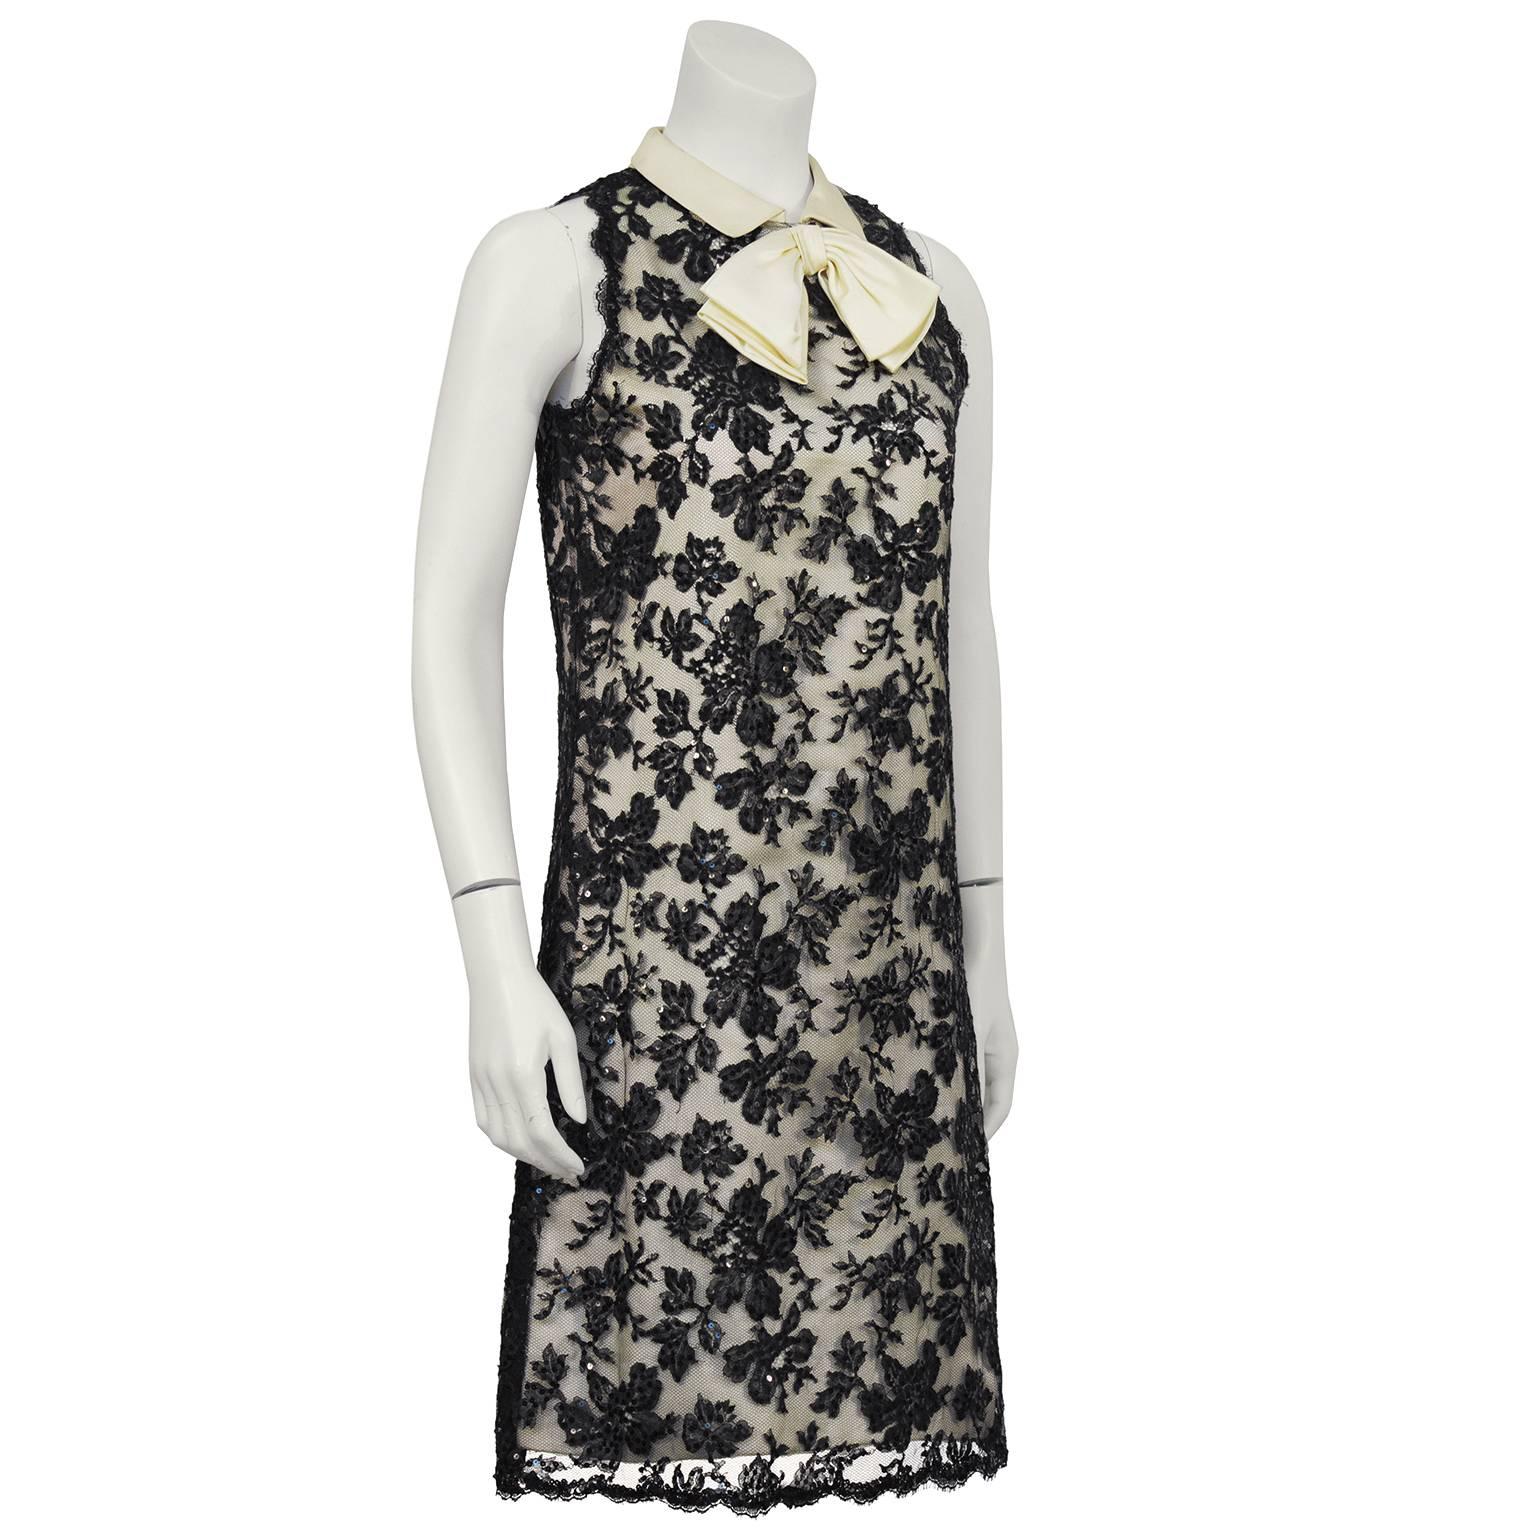 Beautiful 1960's cream satin sleeveless cocktail dress with a black lace over lay embellished with sequins. The dress has an off white satin collar that is finished with a static bow at the front of the neck. Zips up the back, unhooks at shoulder